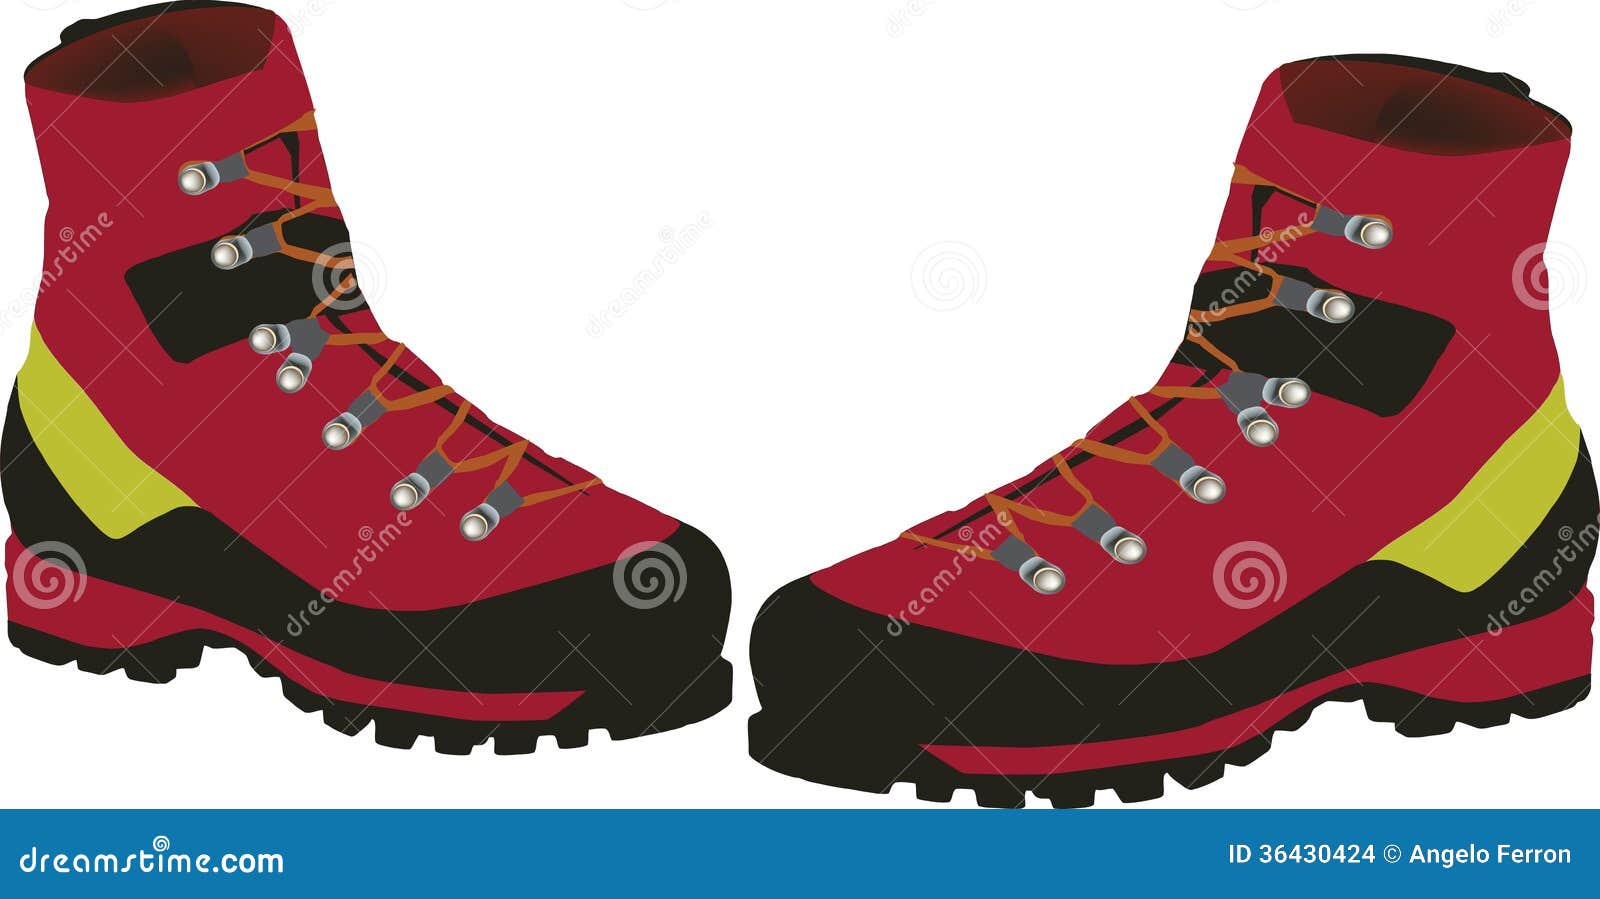 Hiking boots stock vector. Illustration of colorful, high - 36430424